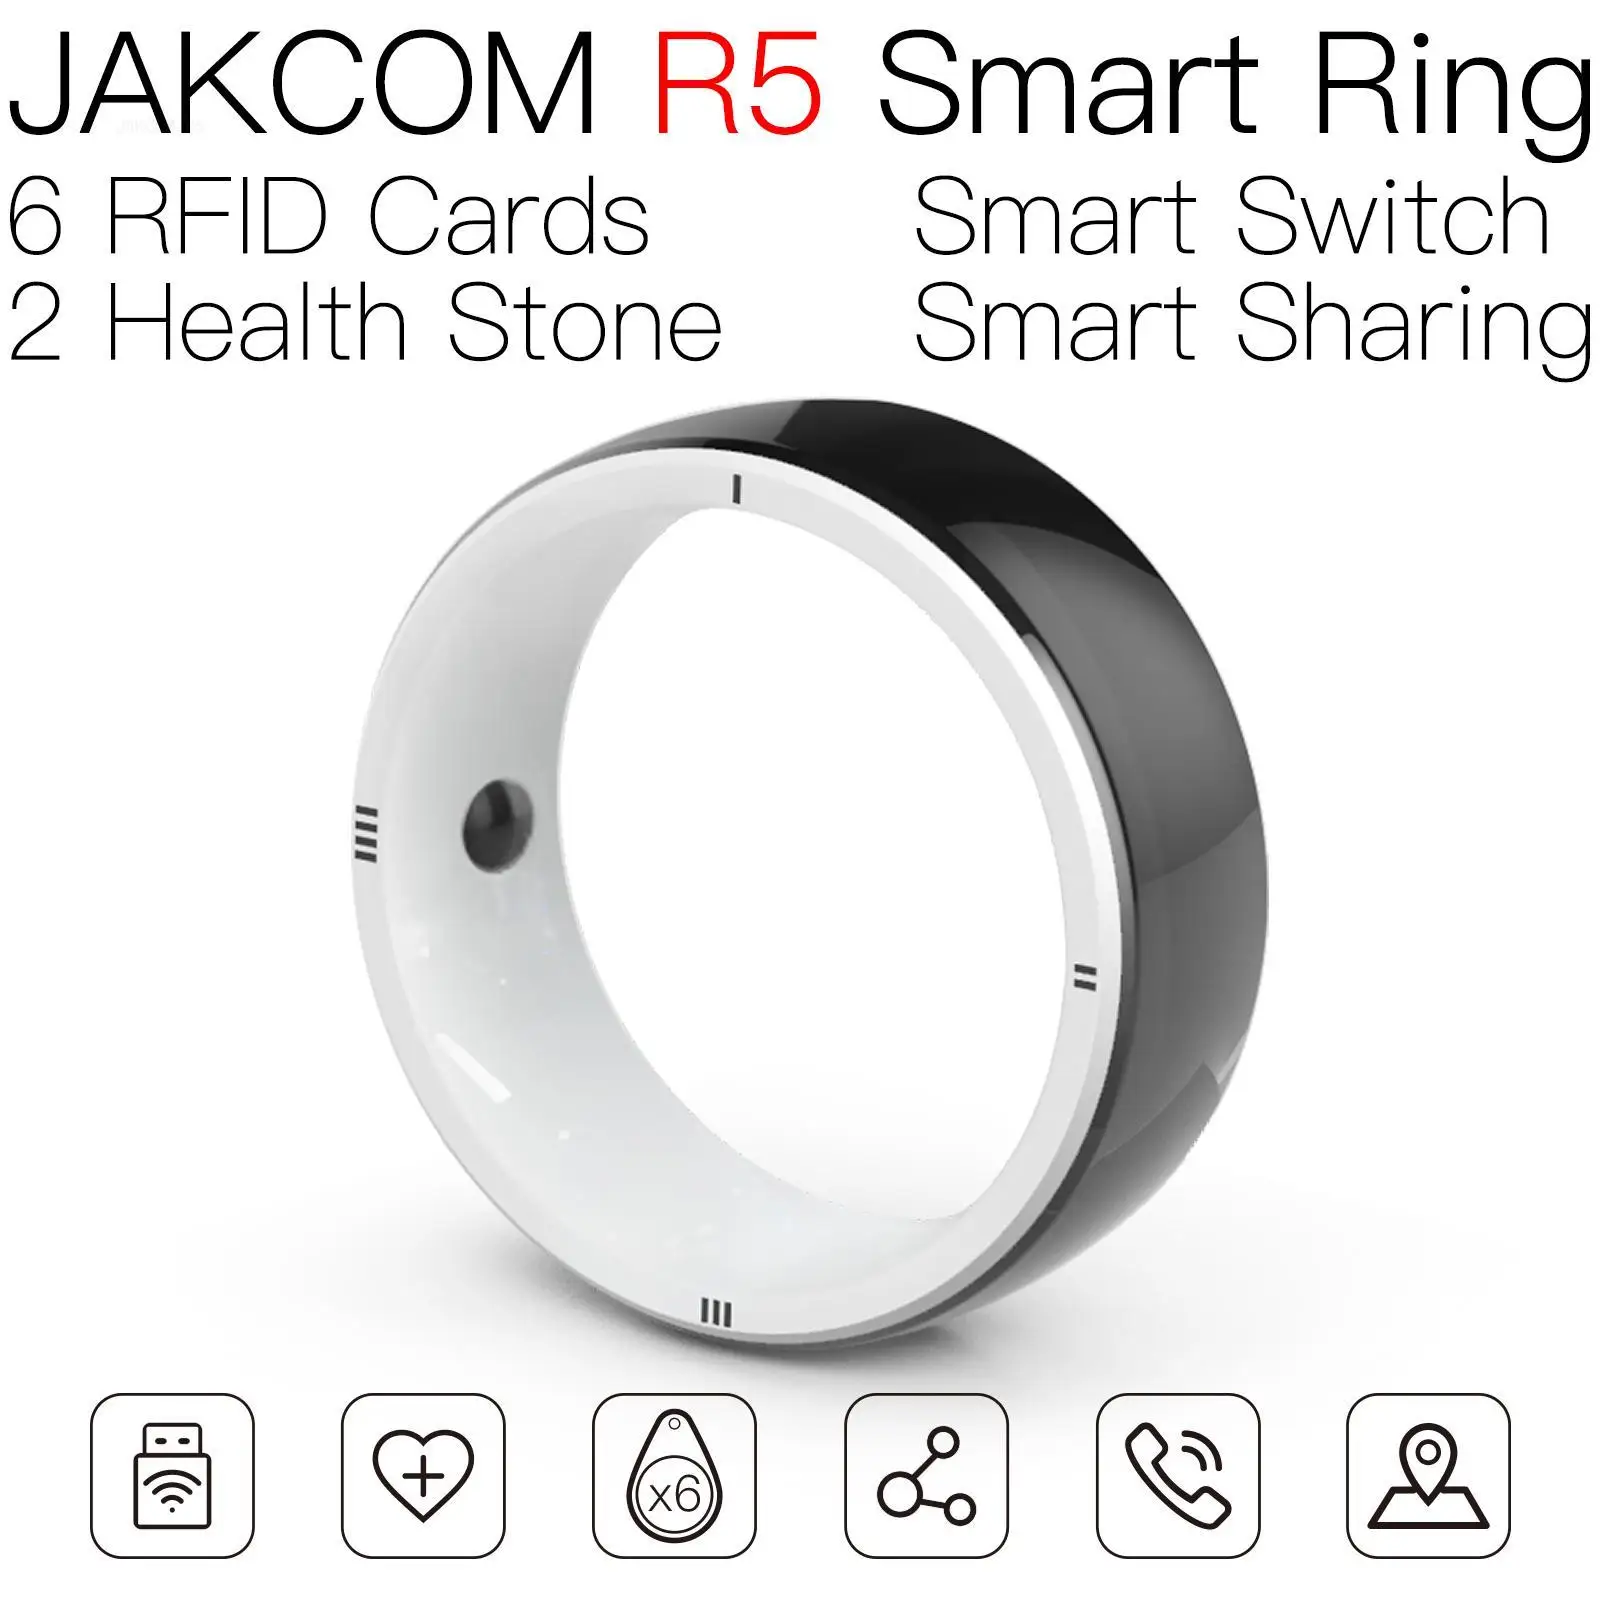 

JAKCOM R5 Smart Ring Match to rfid programmer usb nfc metal business card pigeon ring and sling bag alien aln 9654 tag